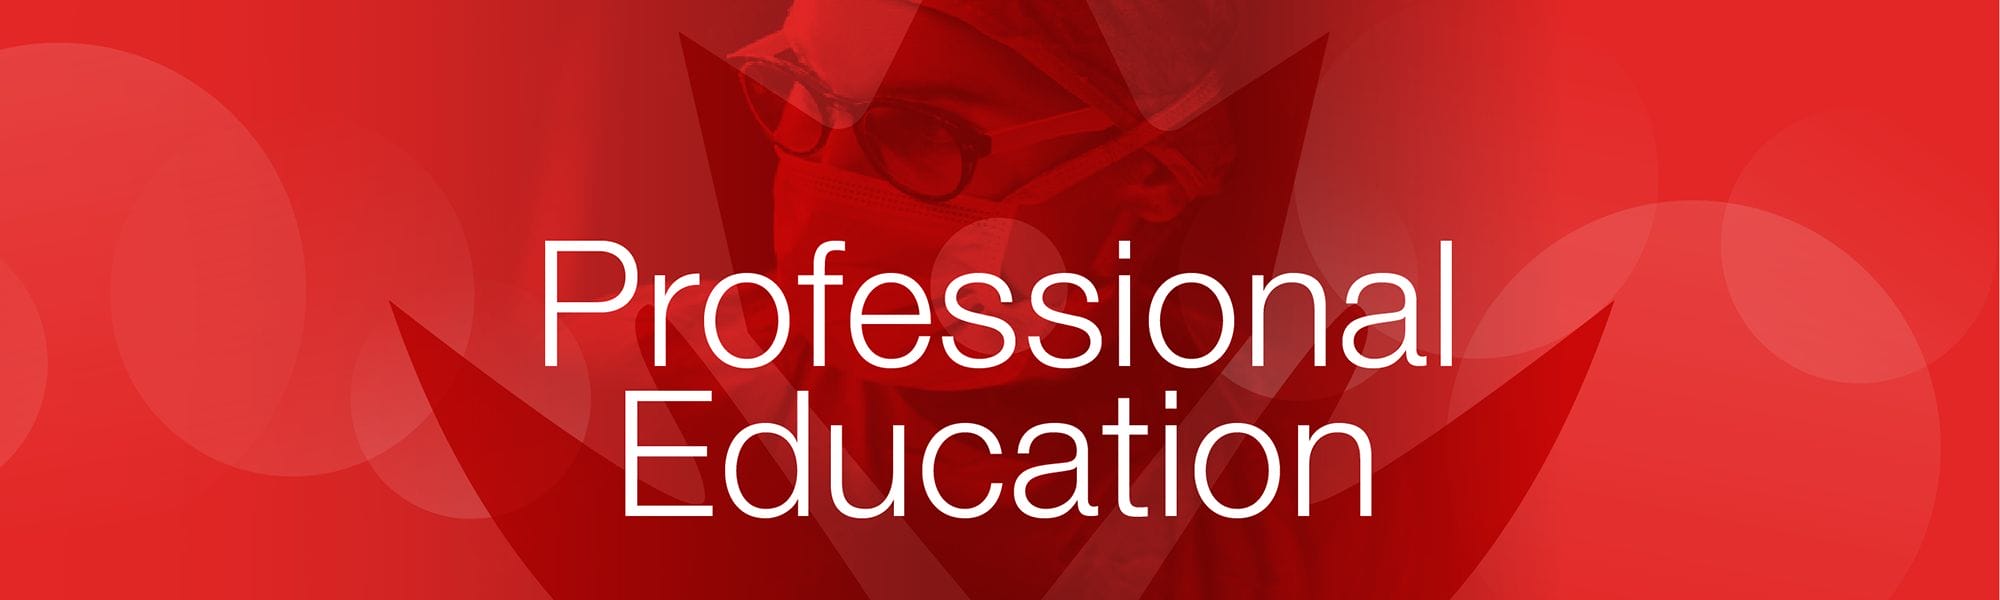 Red background with an abstract design featuring a translucent overlay of a female professional's face wearing glasses, and the text "professional education" in white.